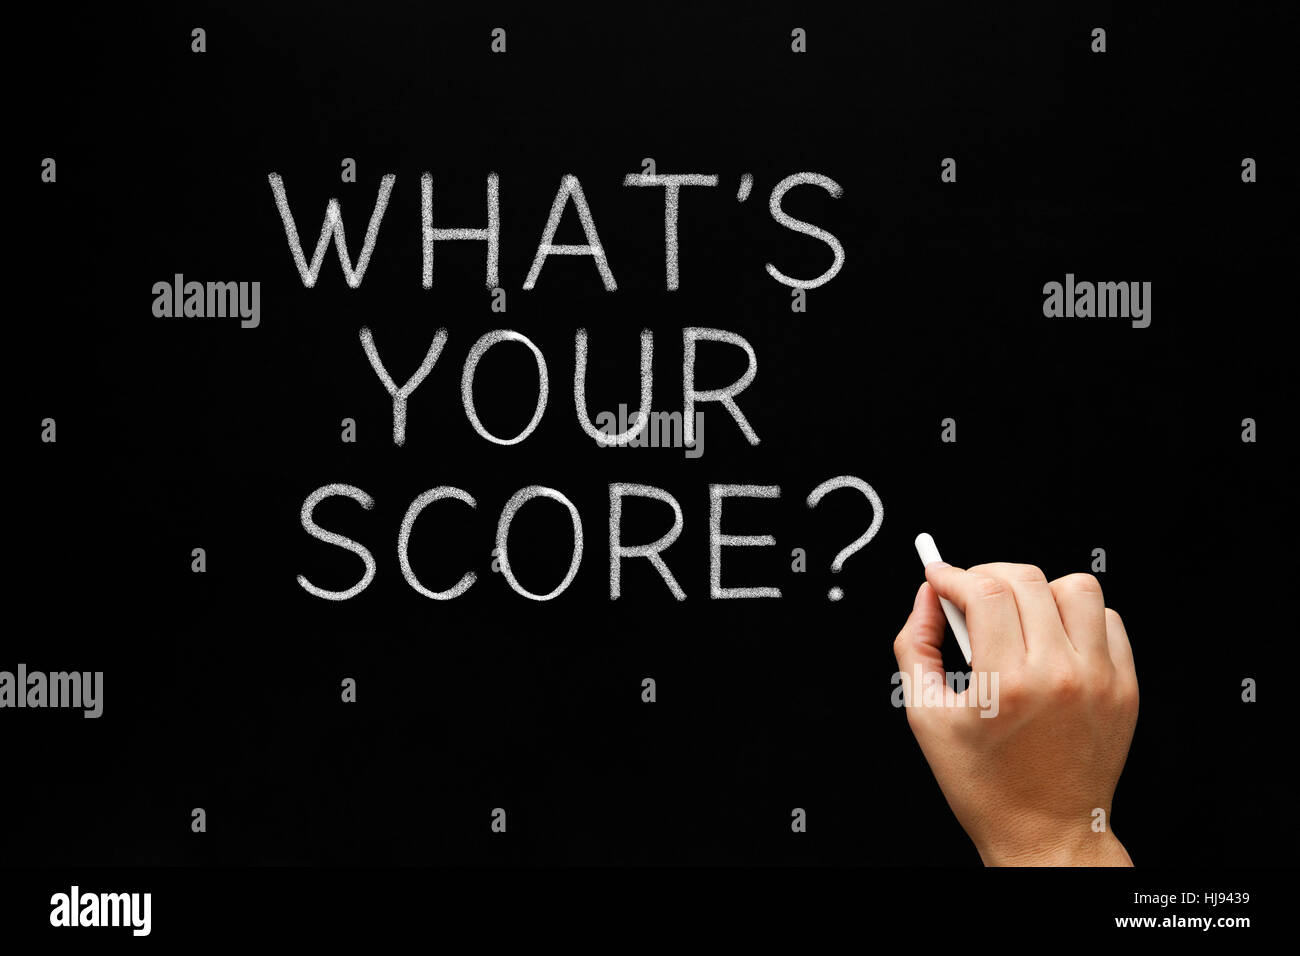 Hand writing What's Your Score with white chalk on blackboard. Stock Photo